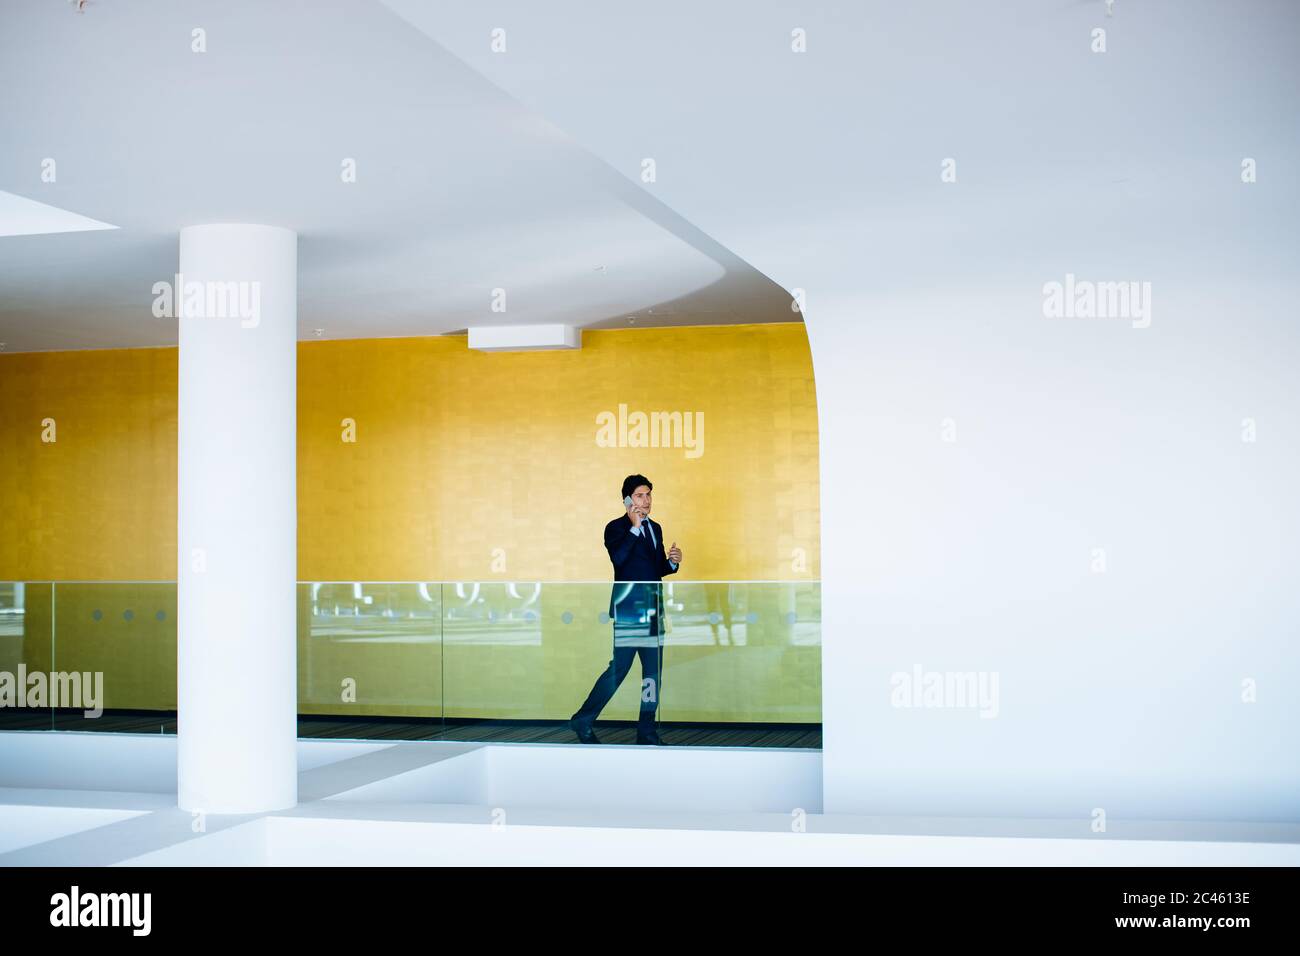 Businessman using mobile phone in hotel building Stock Photo